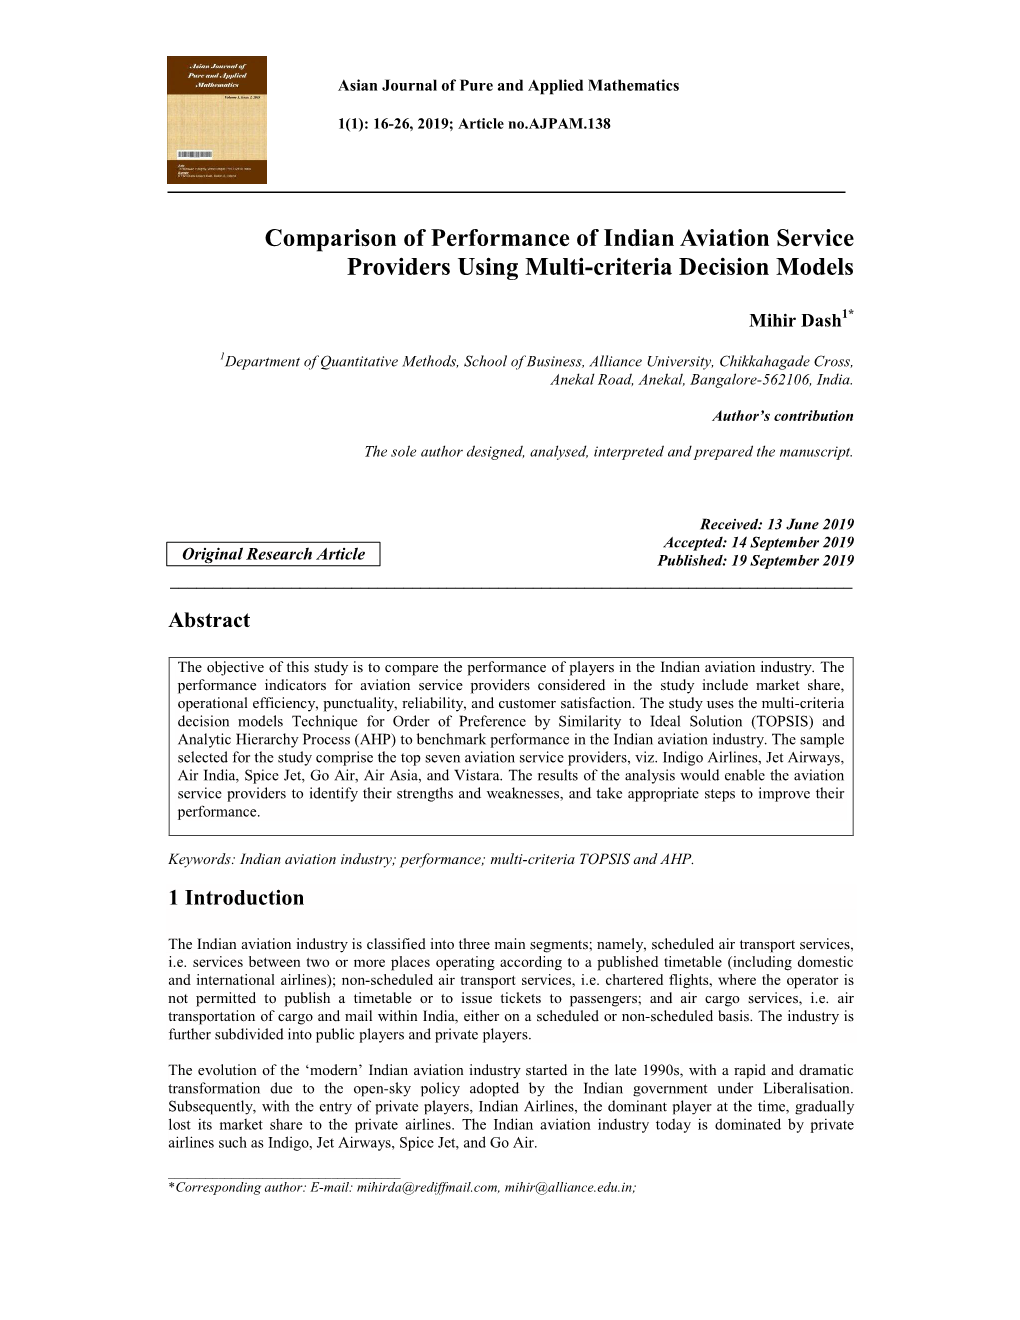 Comparison of Performance of Indian Aviation Service Providers Using Multi-Criteria Decision Models